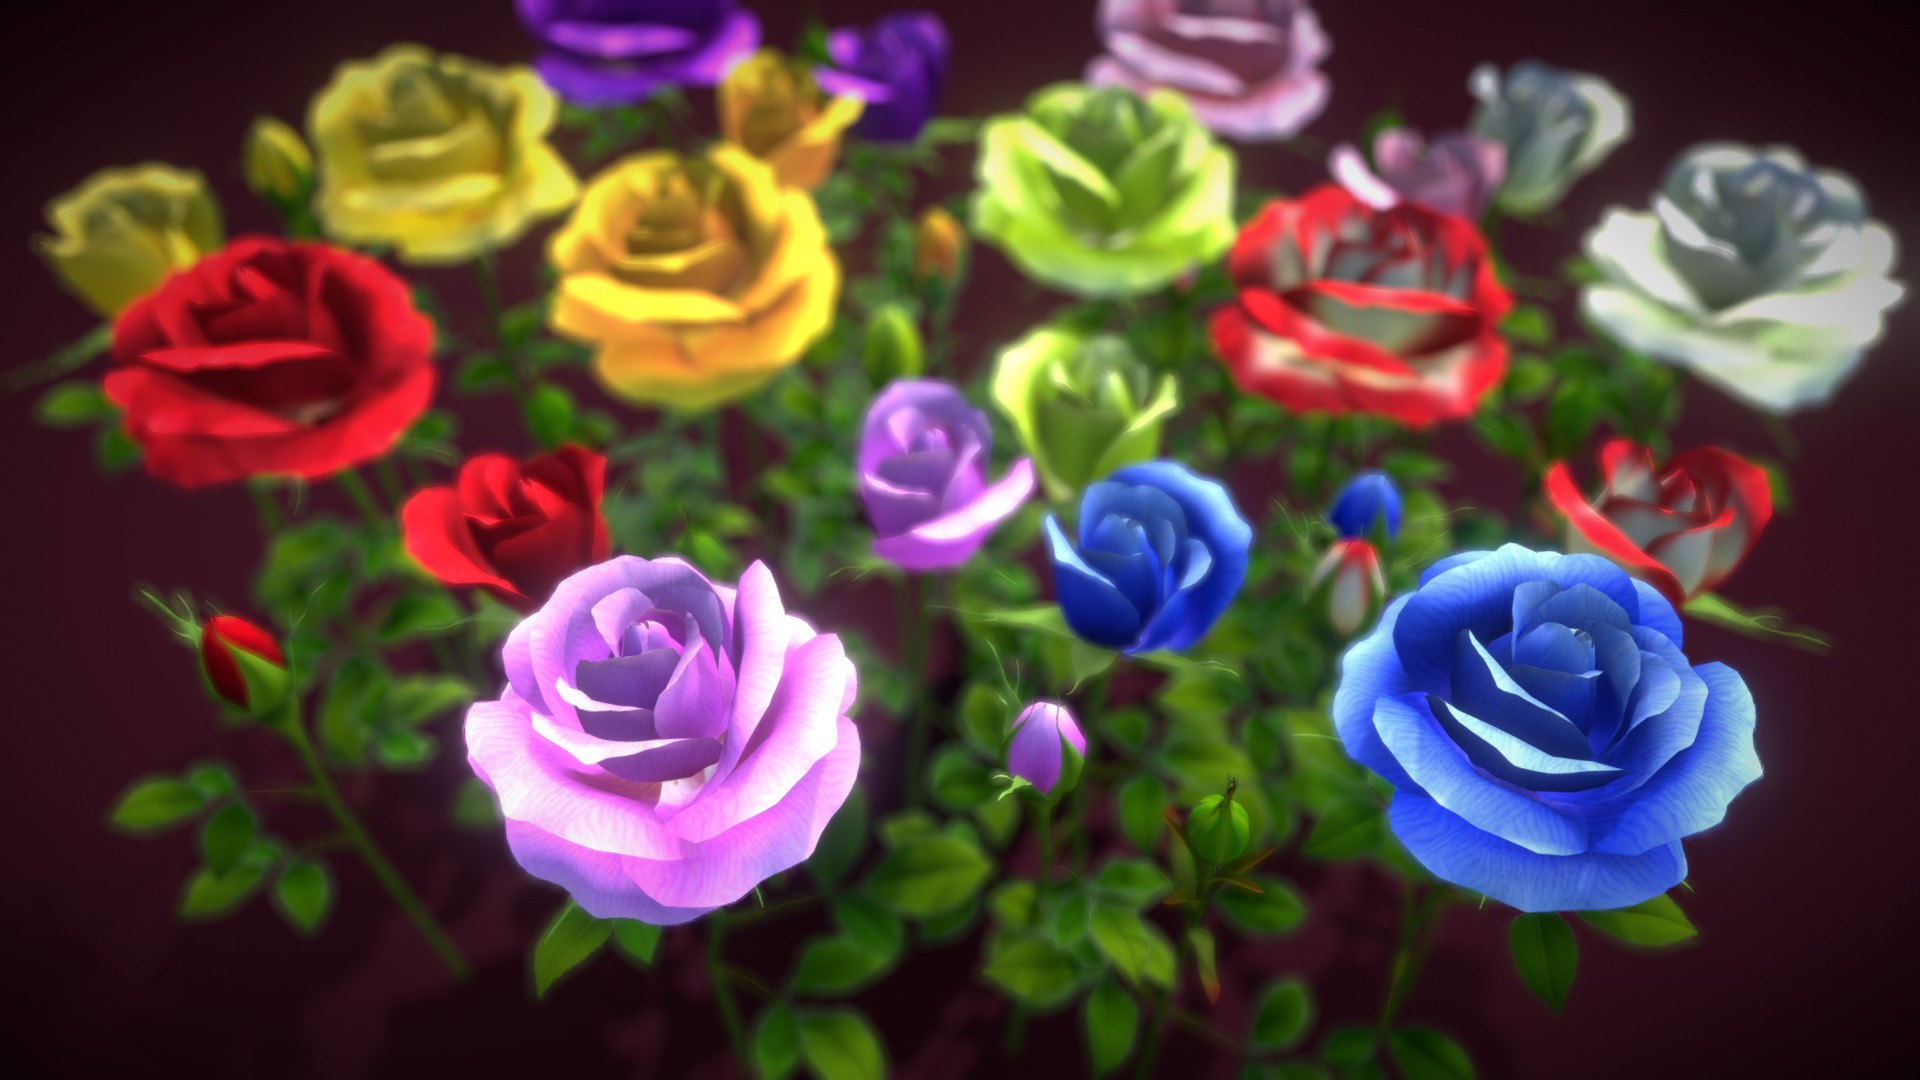 3D model Flower Rose Madiver - This is a 3D model of the Flower Rose Madiver. The 3D model is about a group of colorful flowers.